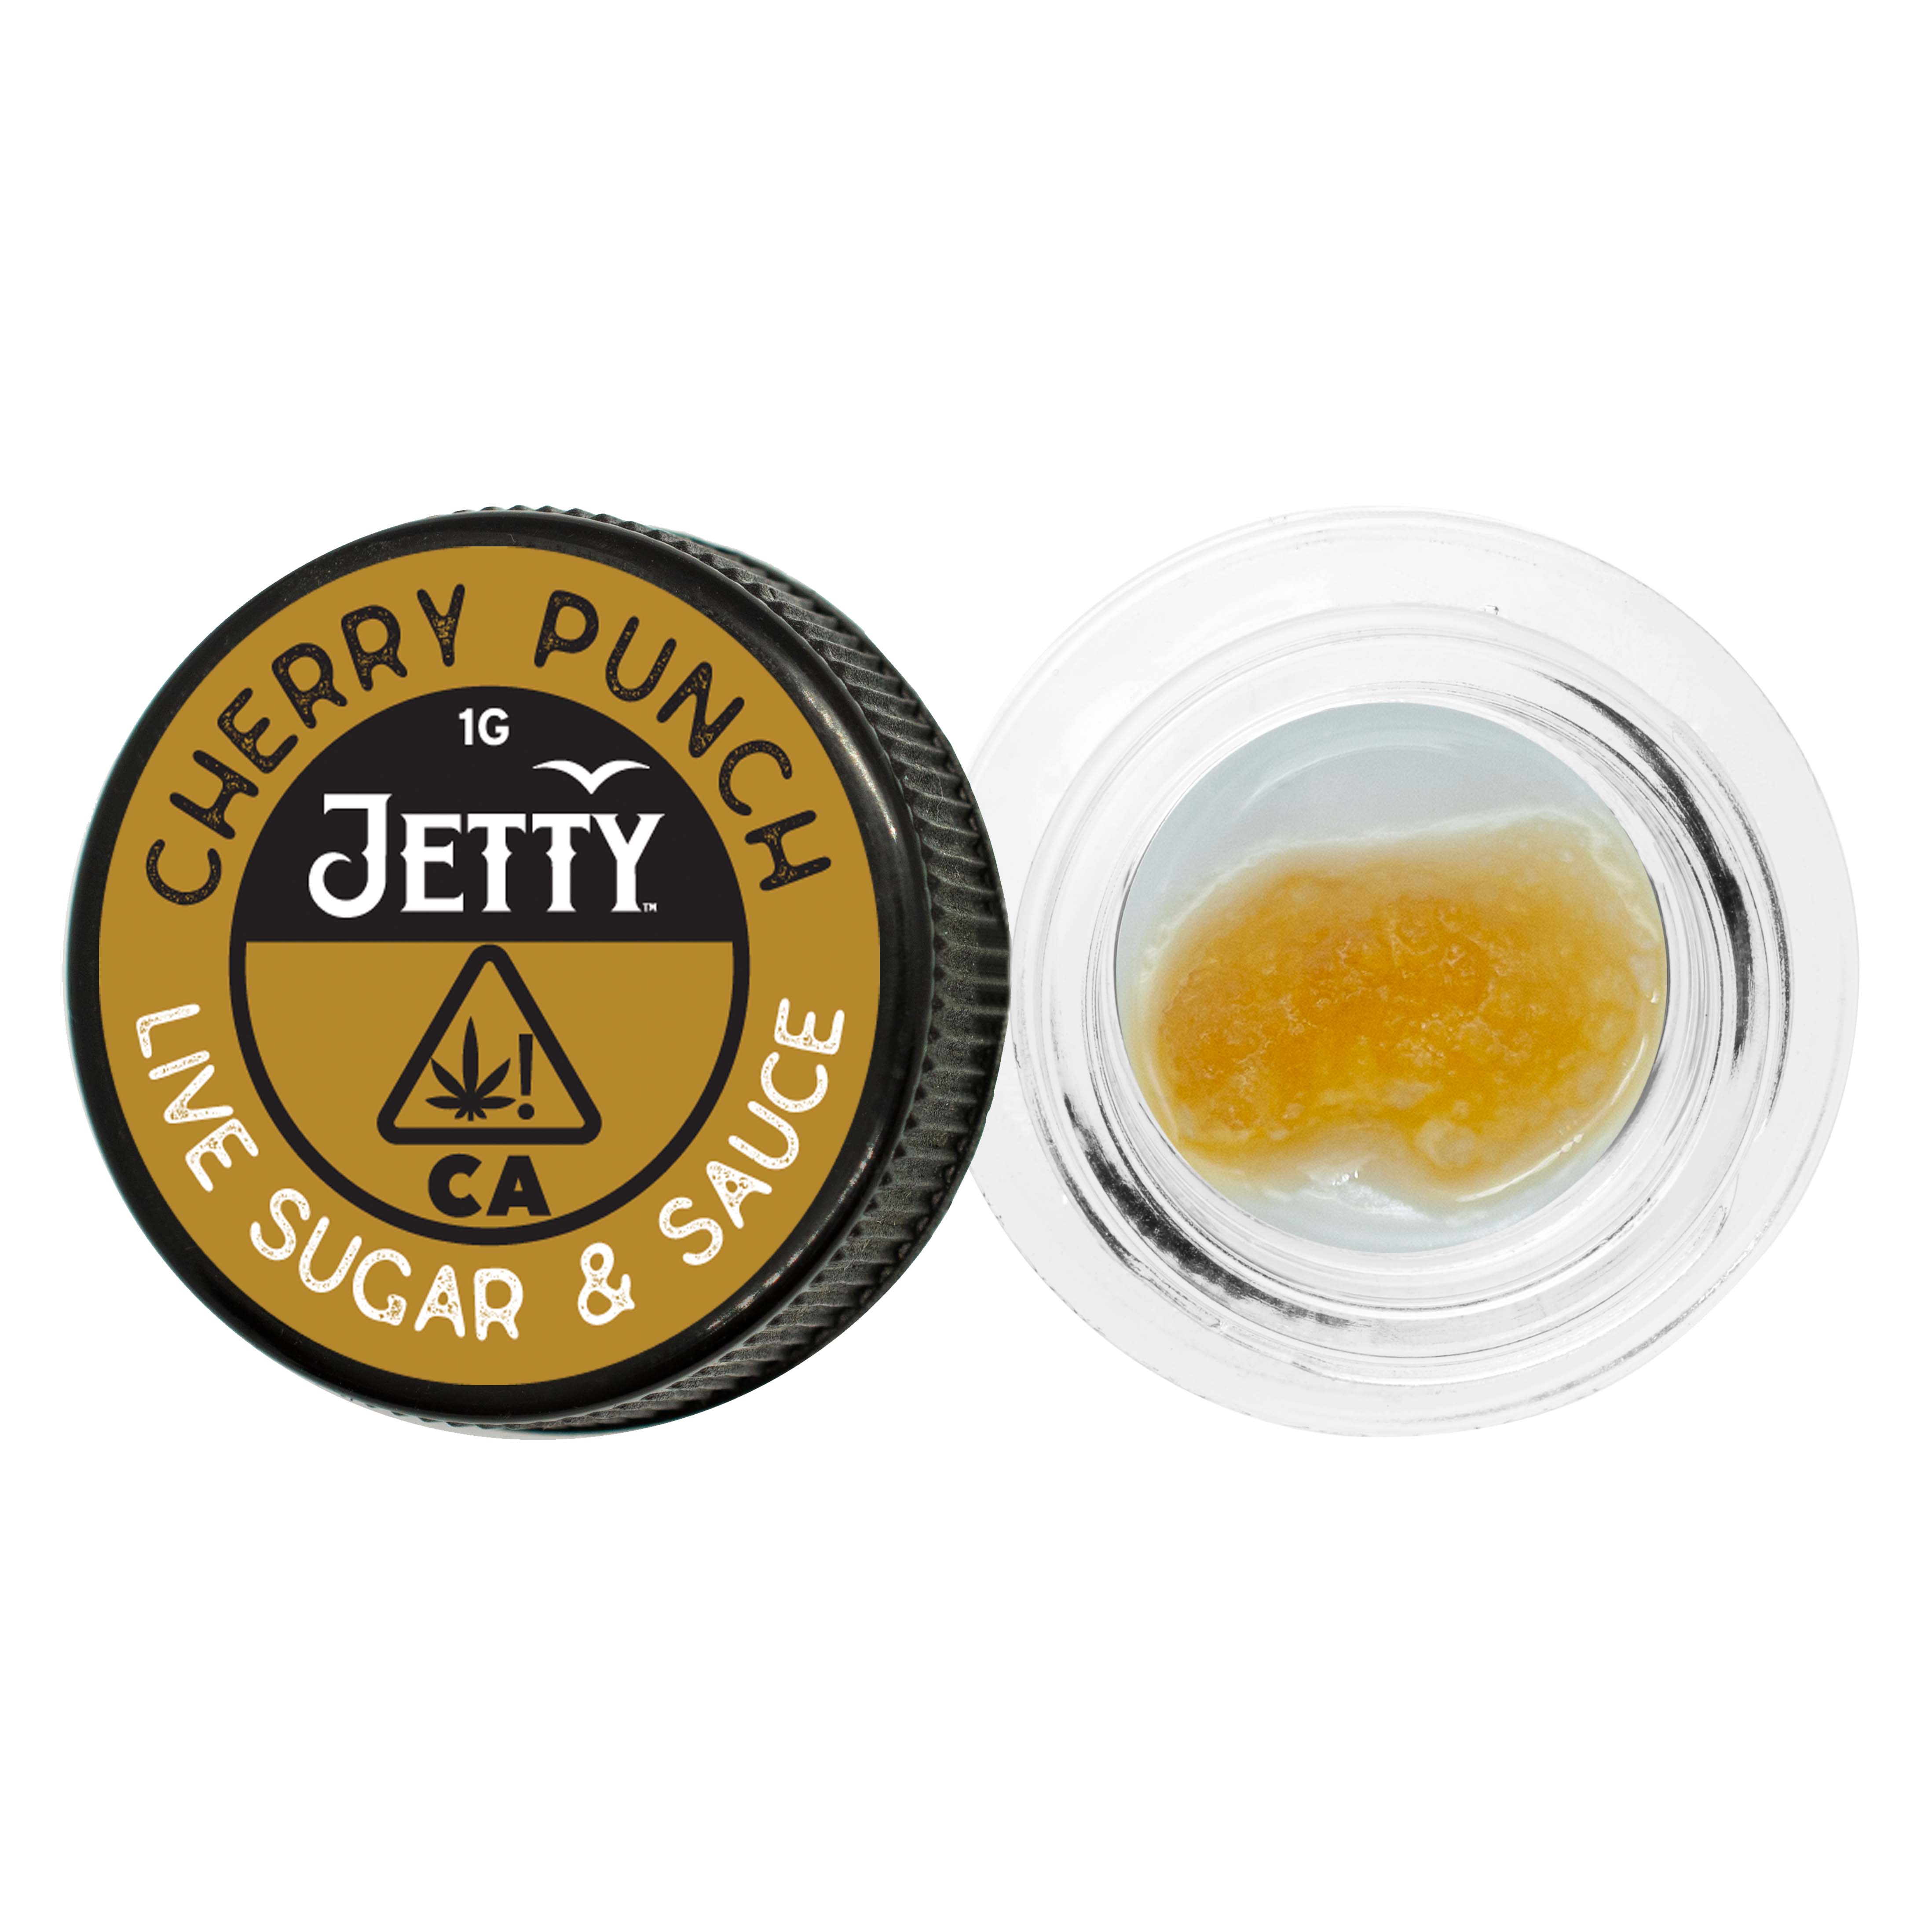 A photograph of Jetty Live Sugar and Sauce 1g Cherry Punch